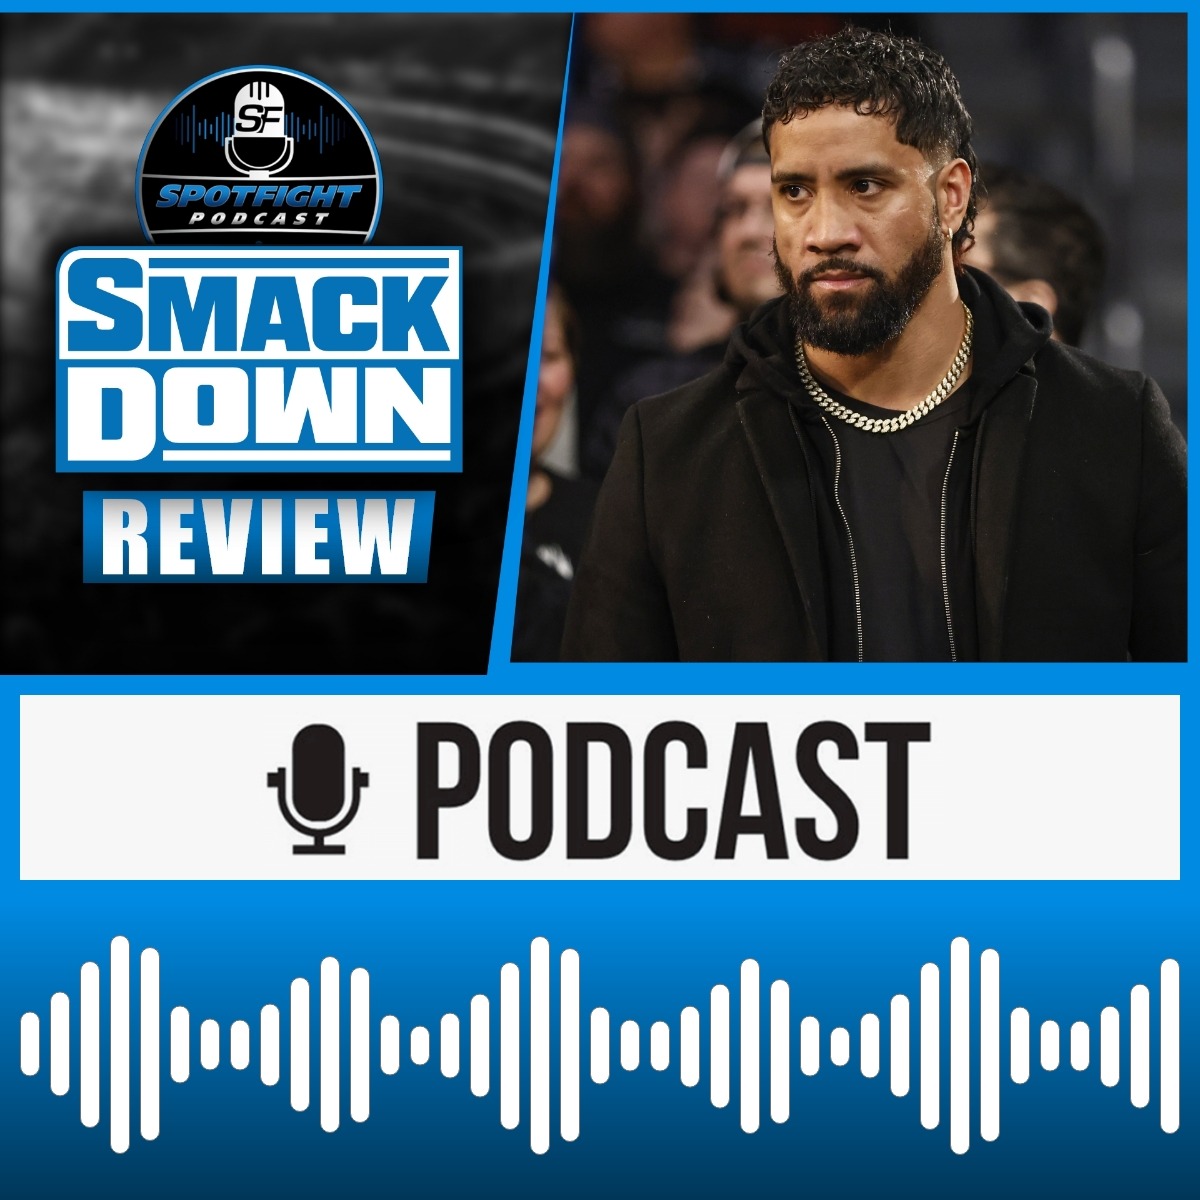 SmackDown | Auch Jey Uso rettet die Show nicht - WWE Wrestling Review 24.02.2023